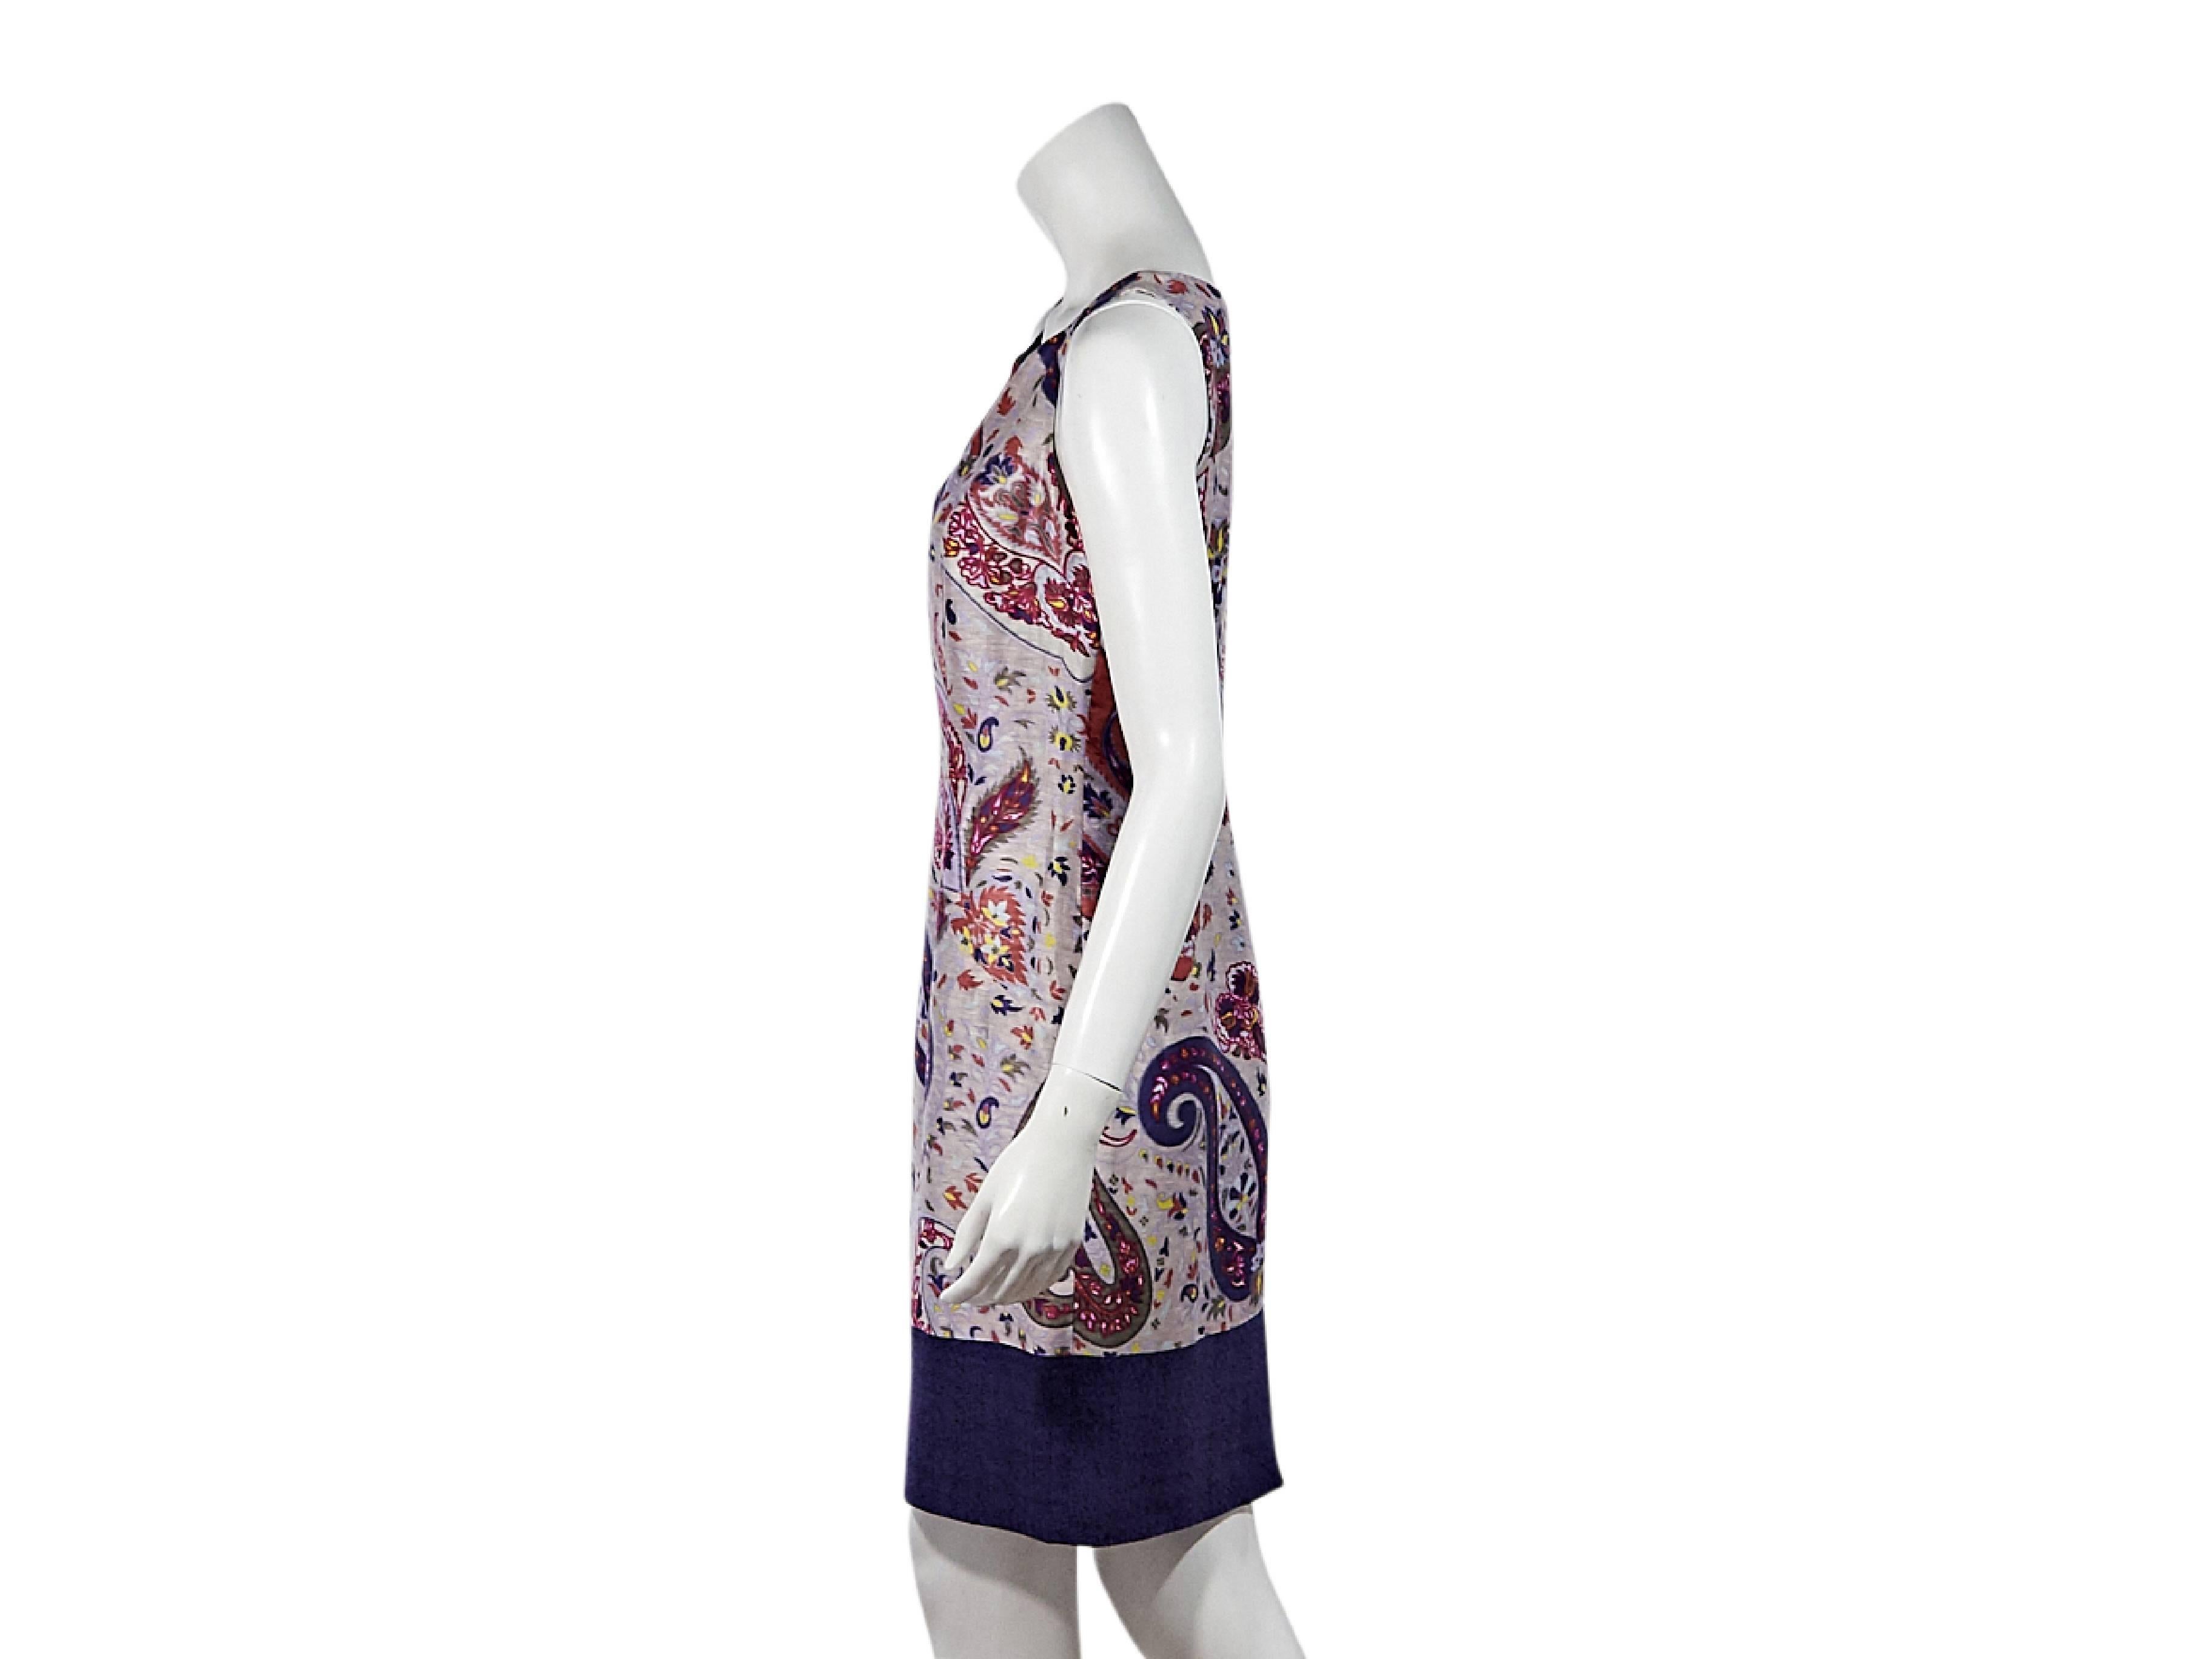 Product details:  Multicolor paisley-printed dress by Etro.  Scoopneck.  Sleeveless.  Concealed back zip closure.  Back hem vent.  Size 6
Condition: Pre-owned. Very good.

Est. Retail $ 798.00
